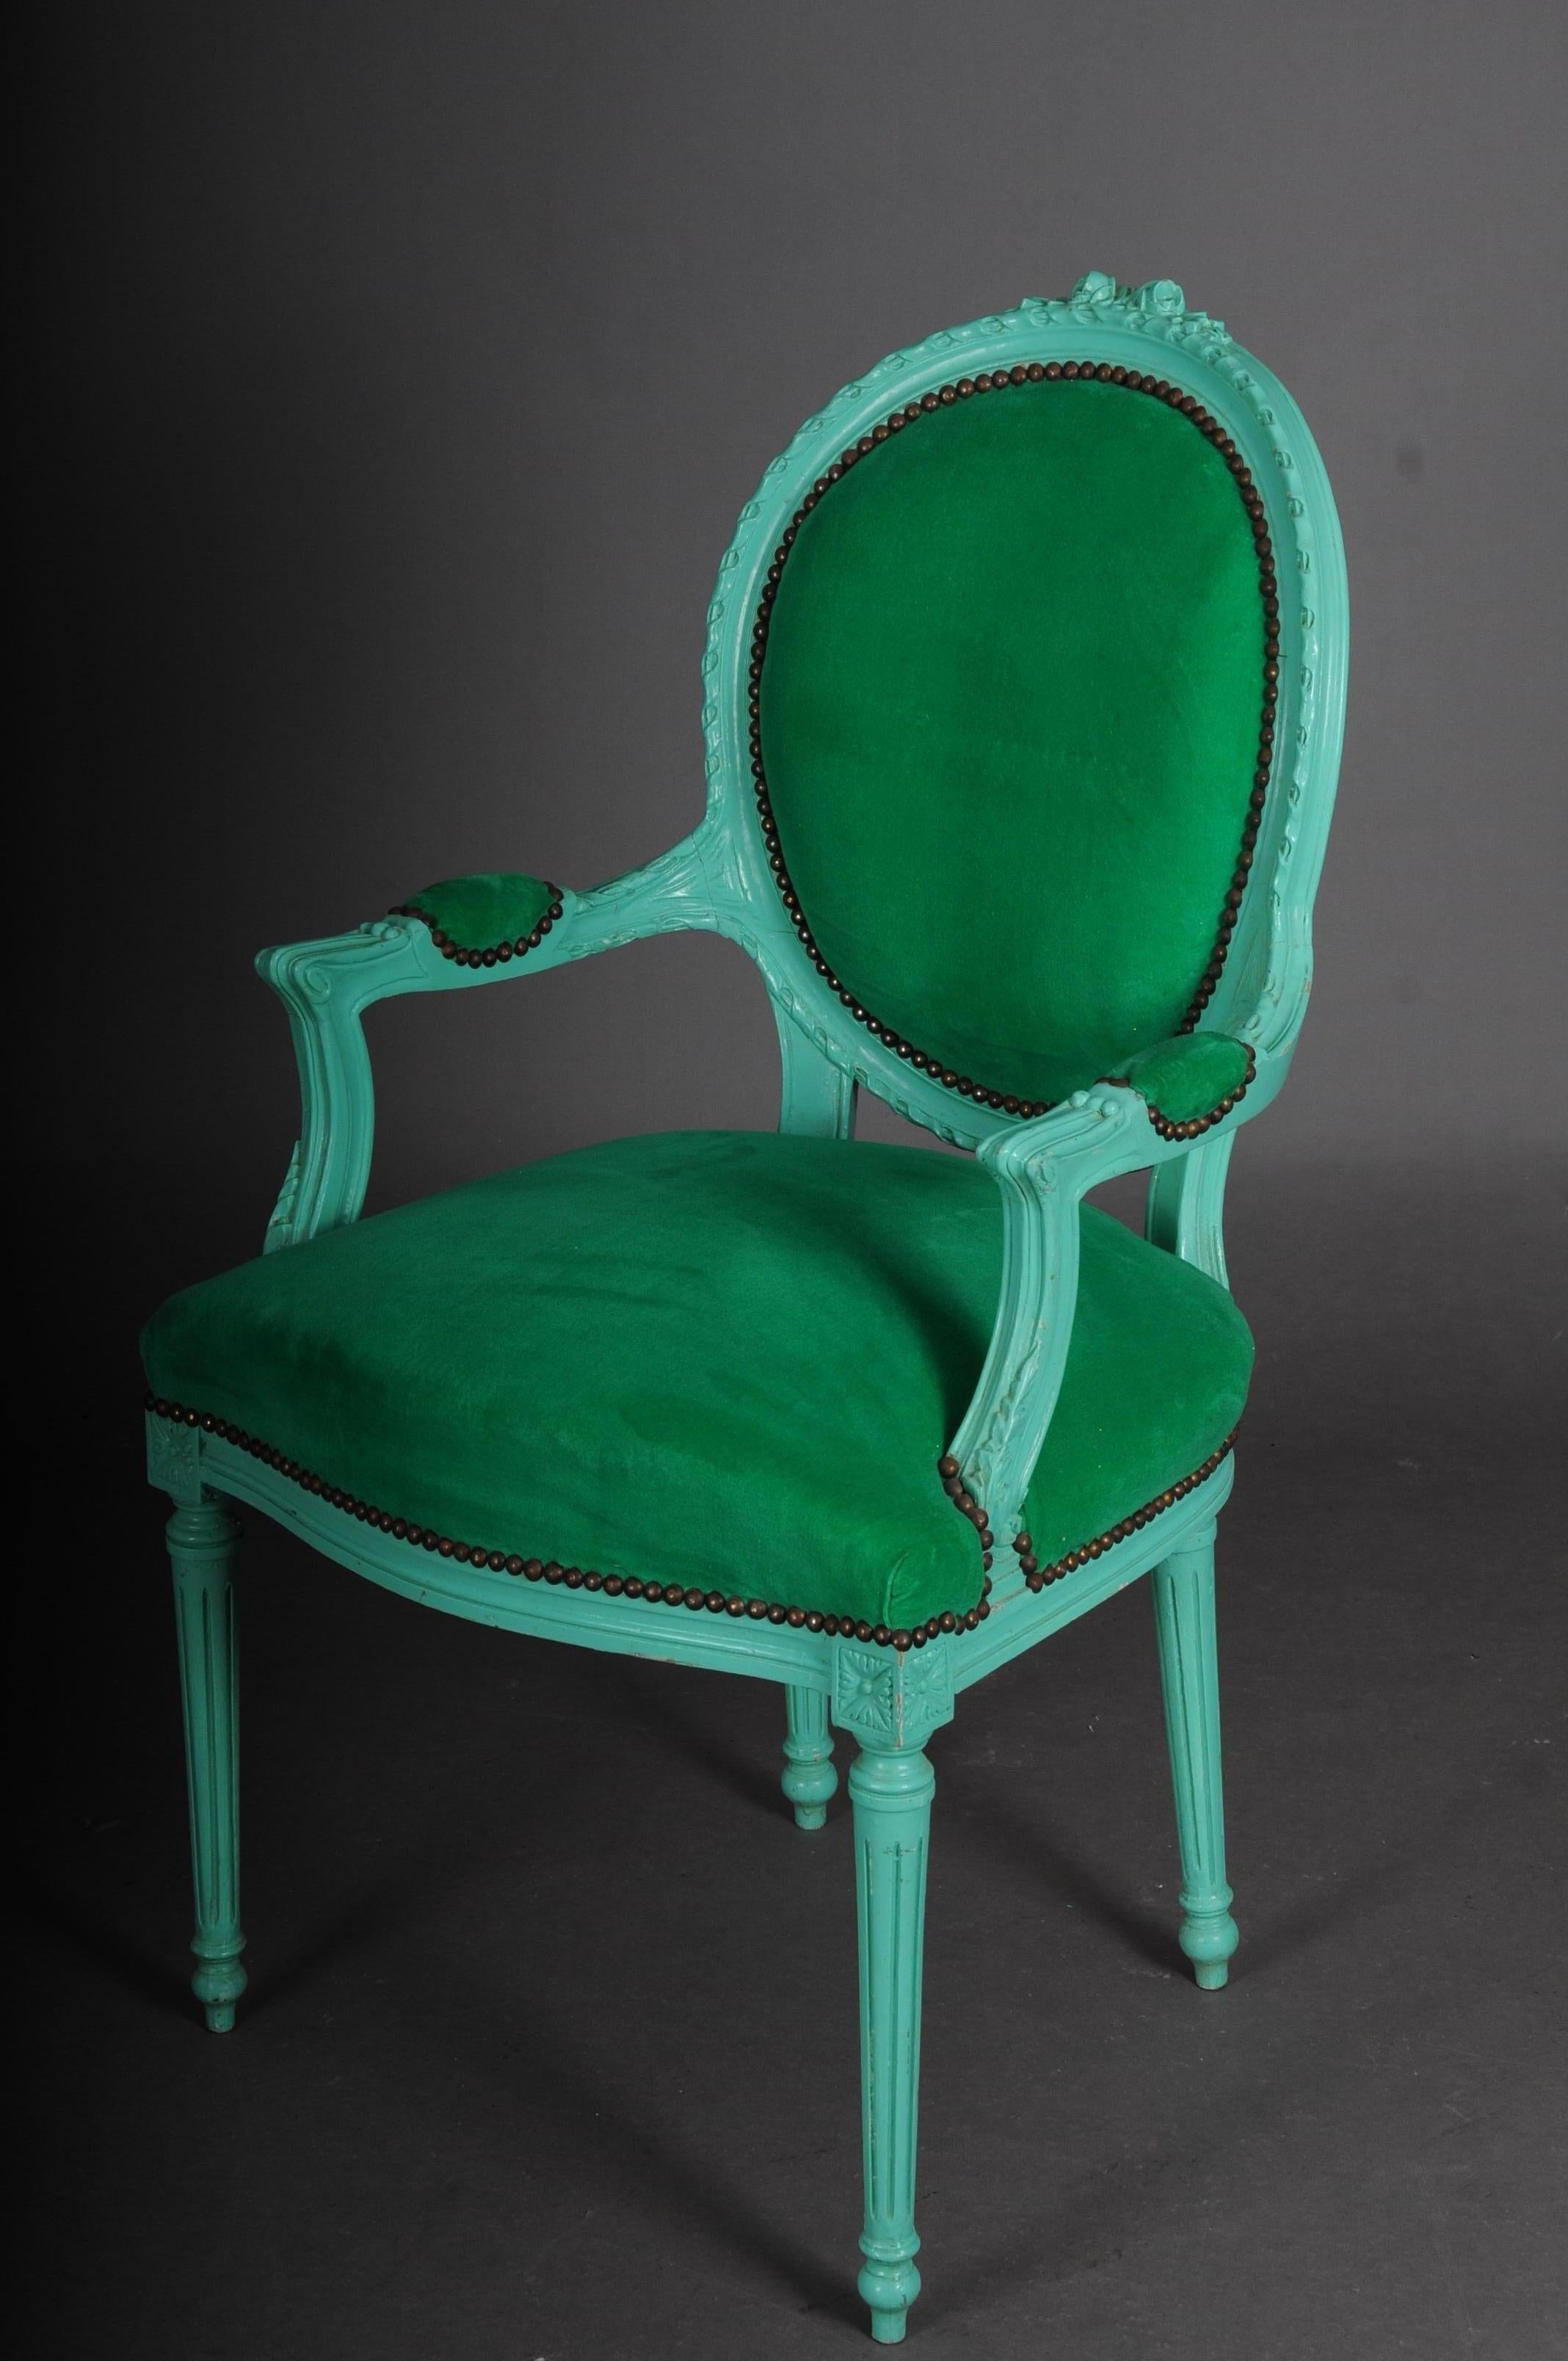 Fancy armchair in Louis XVI style, green

Solid wood, painted green. Curved and carved frame on fluted, tapered legs. Curly armrests. Straight supports with acanthus leaves on top. Rising armrests in oval backrest frames ending in carved rocaille